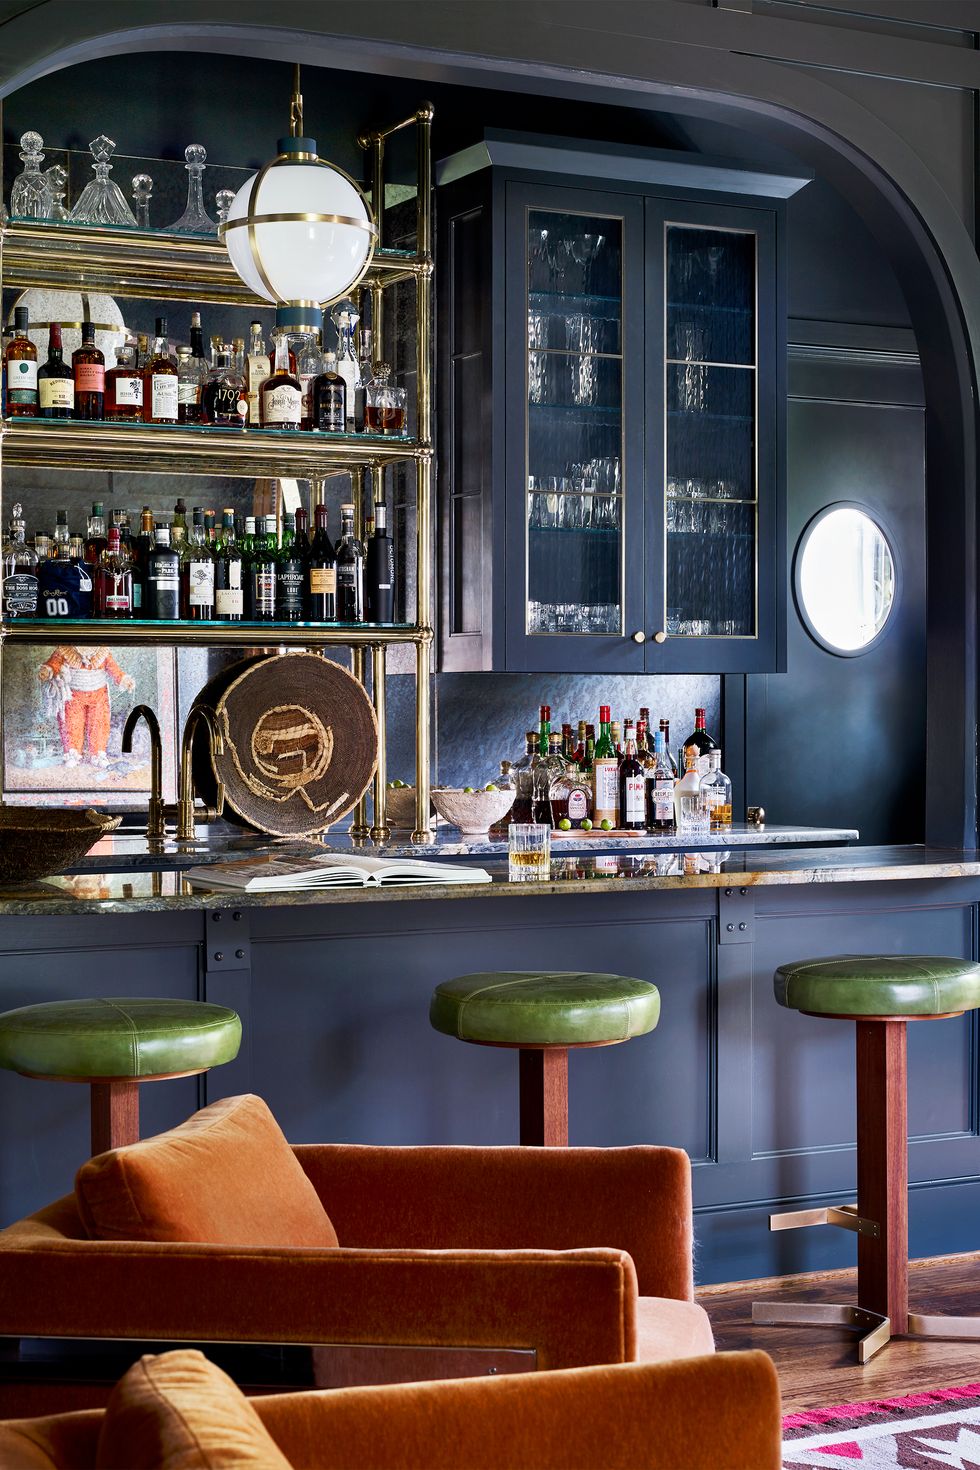 Stocking a Home Bar: Essentials for a Well-Stocked Bar